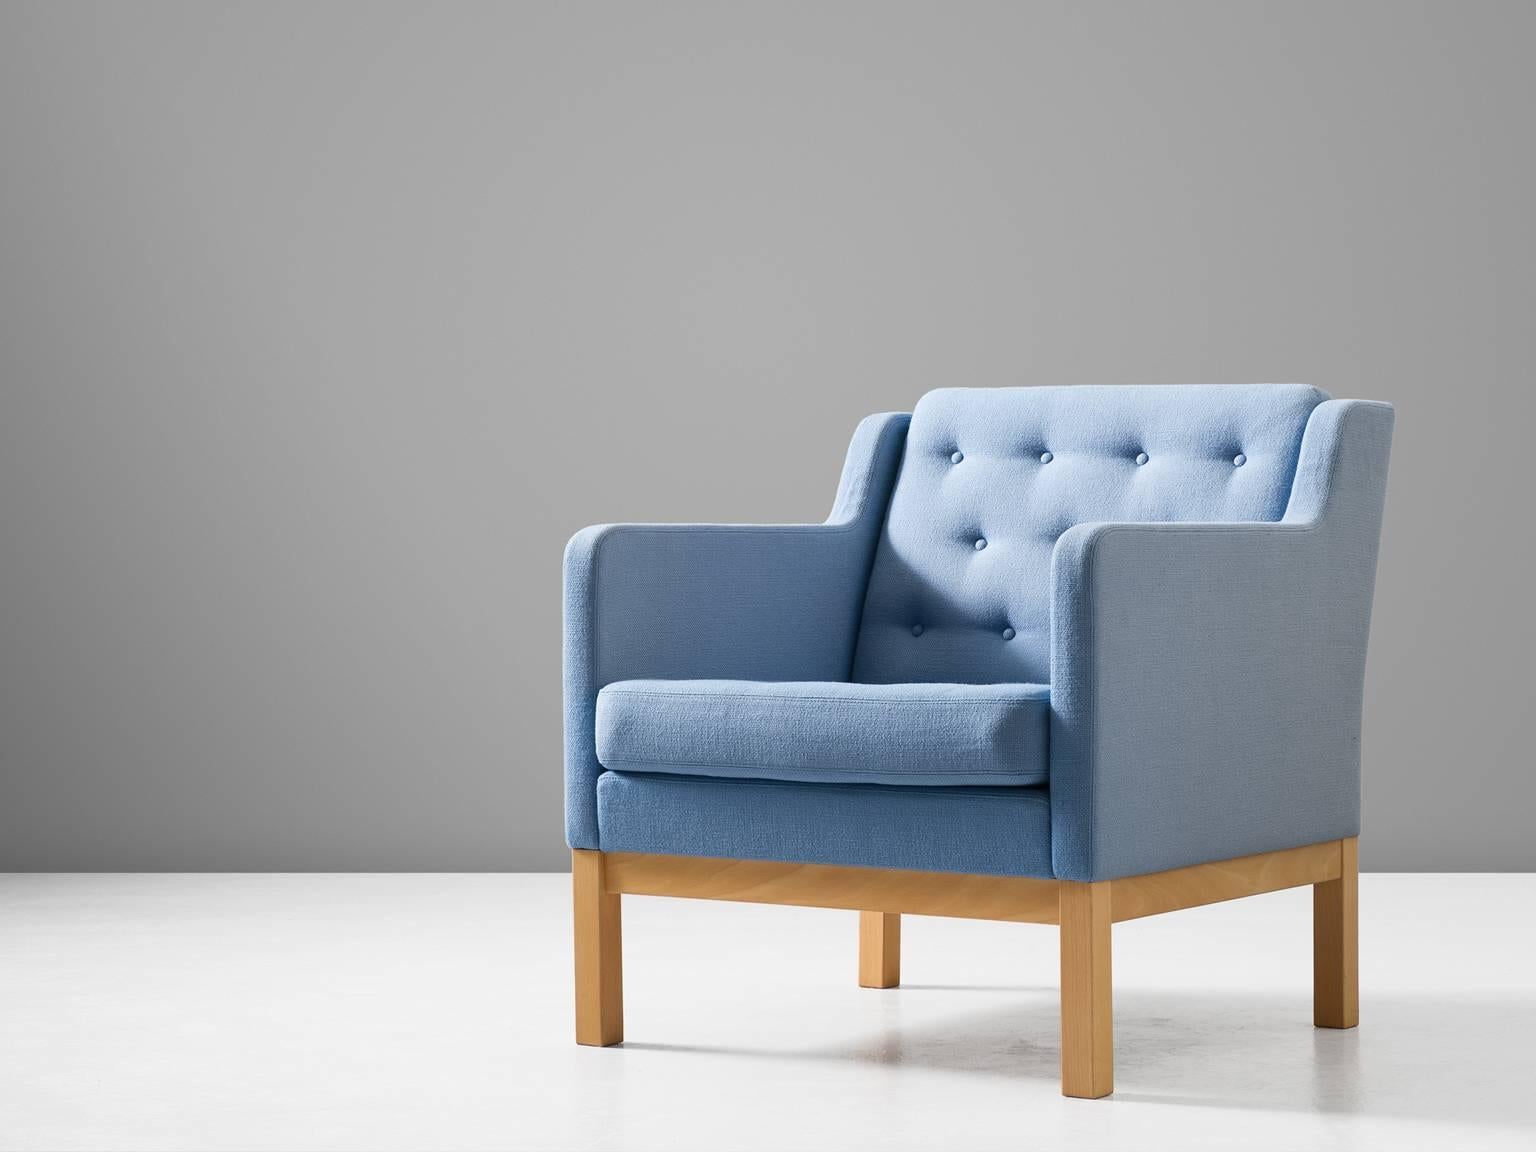 Armchair model EJ 315-1, in and fabric, by Erik Jorgensen for Erik Jørgensen Møbelfabrik, Denmark, circa 1972.

Characteristic Scandinavian lounge chair with a beech wooden frame and soft blue fabric upholstery. The design is simplistic and cubic.